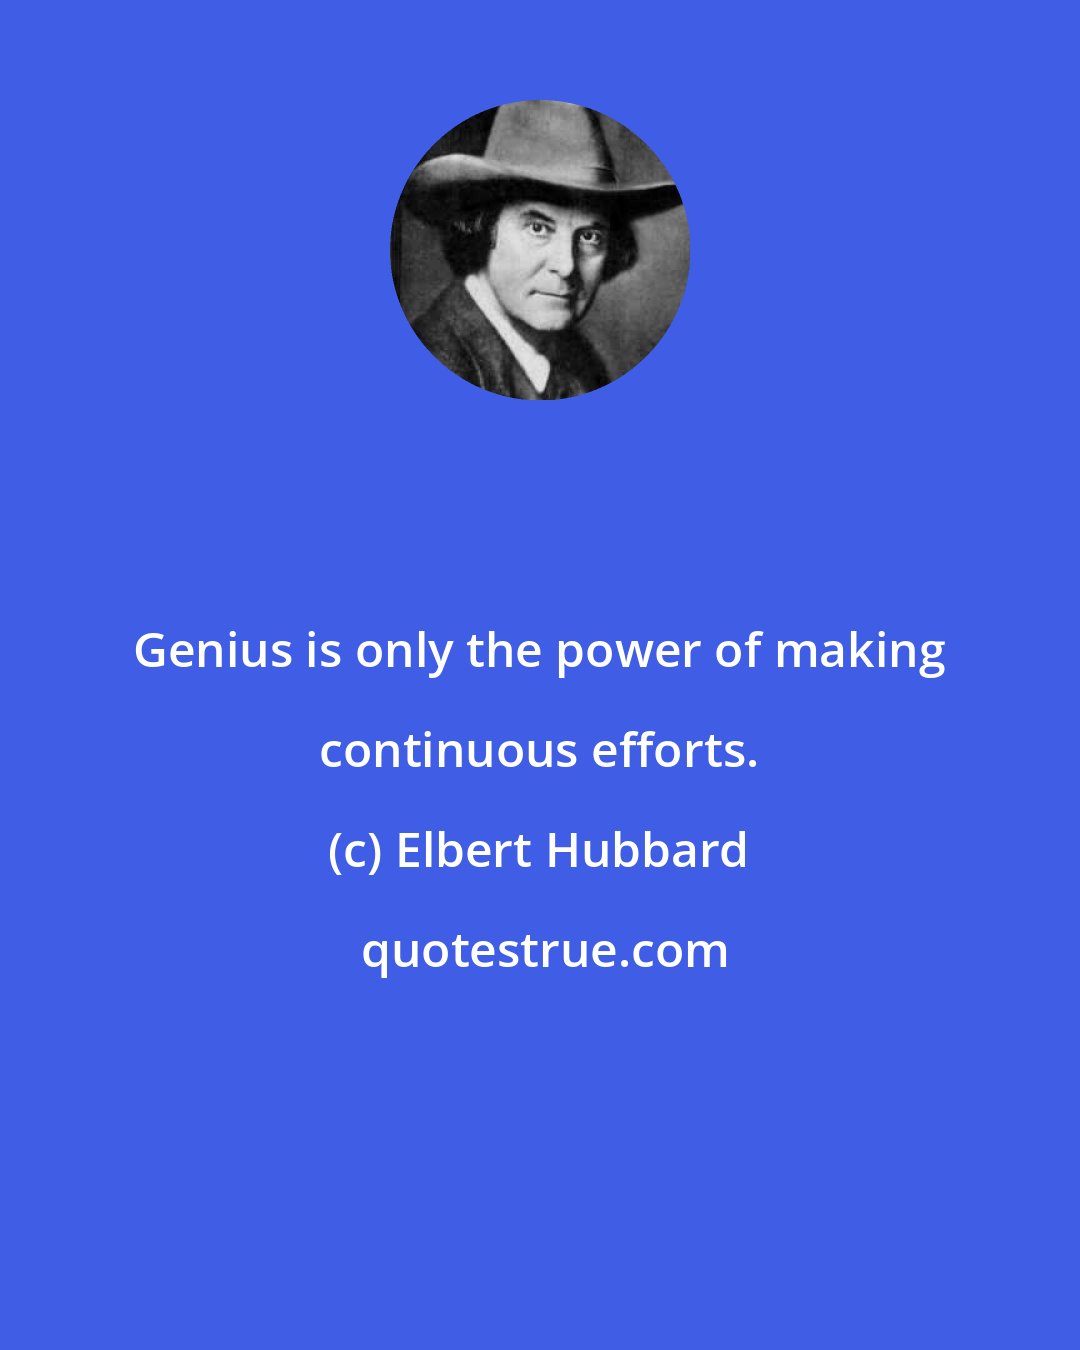 Elbert Hubbard: Genius is only the power of making continuous efforts.